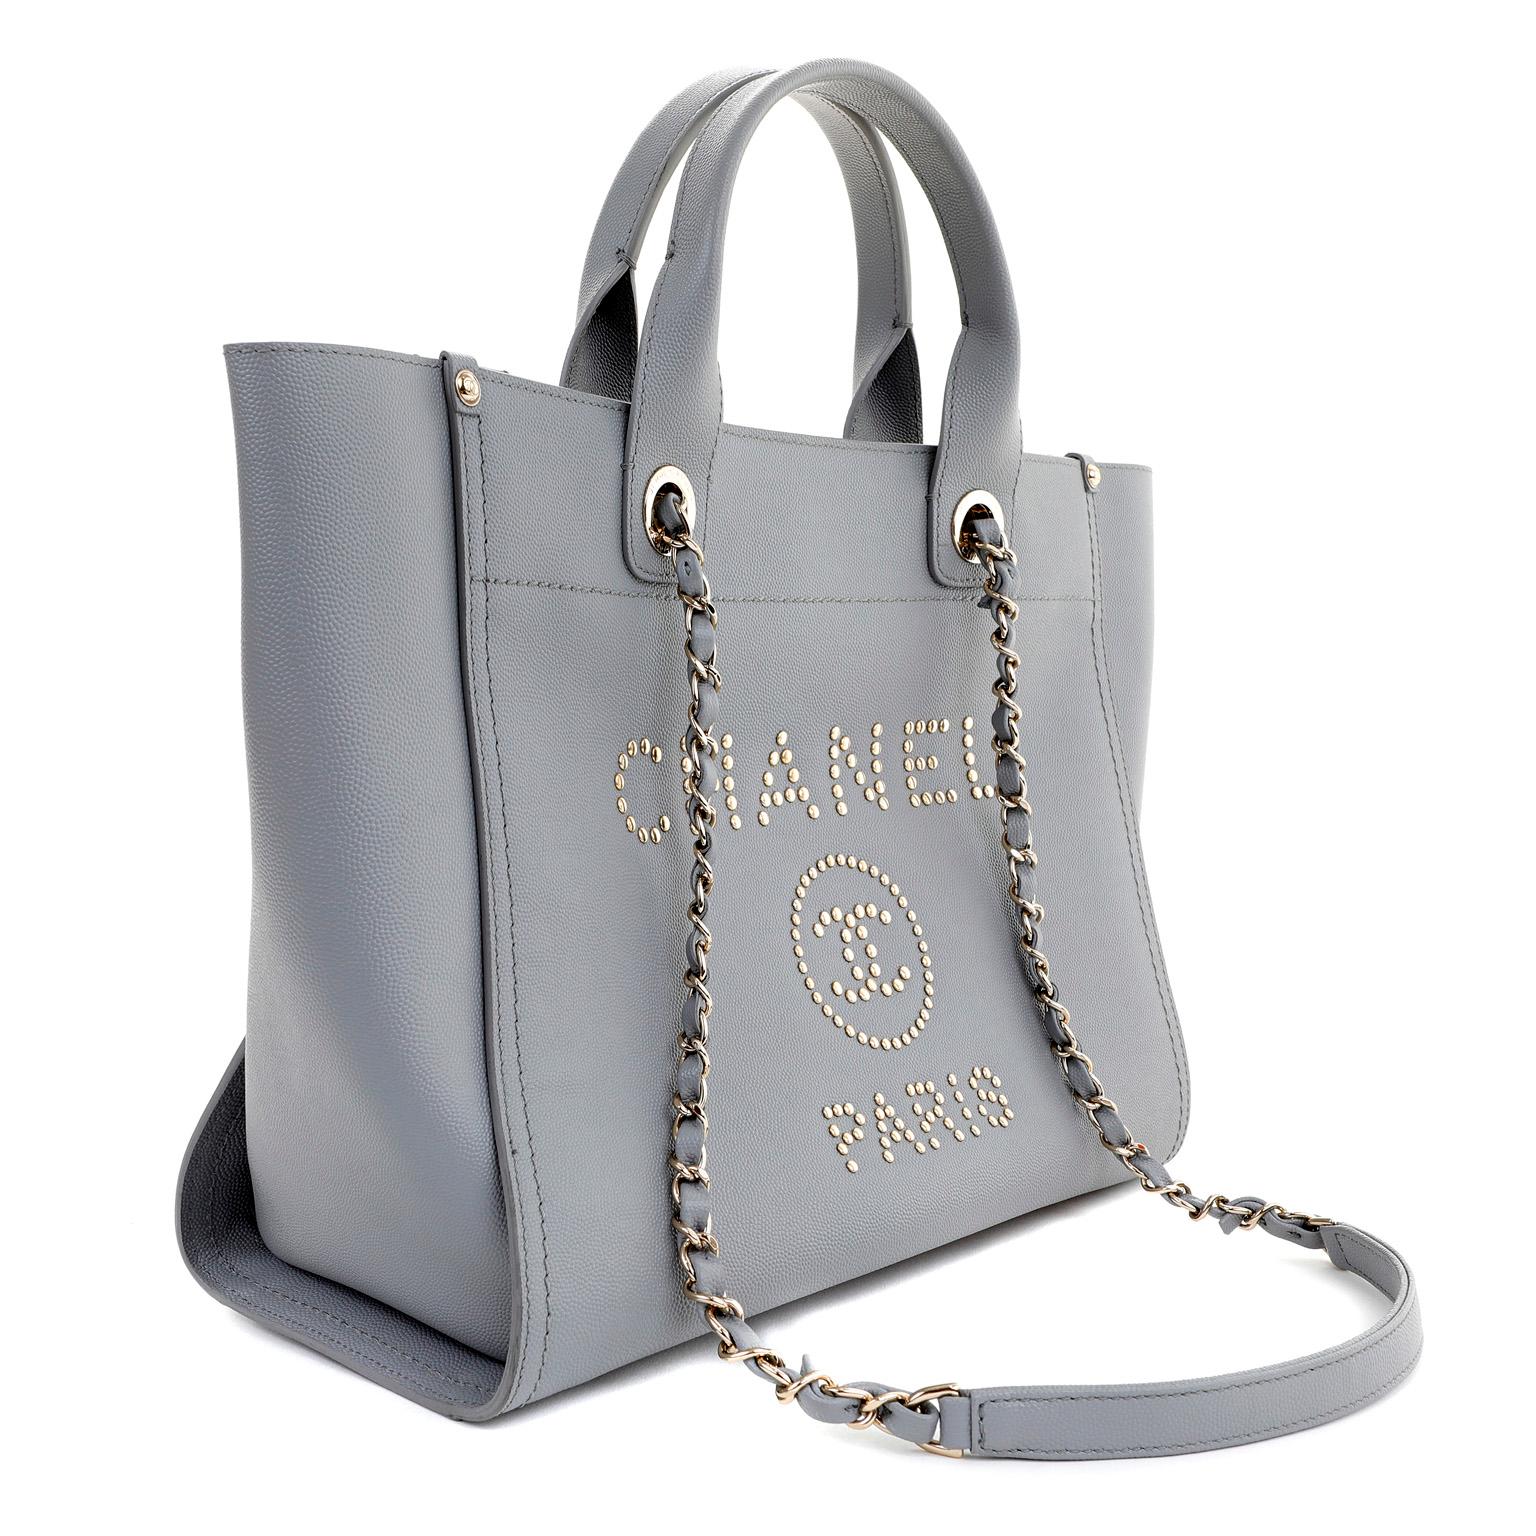 Chanel Grey Caviar Small Studded Deauville Tote Gold Hardware, 2019 (Very Good), Womens Handbag